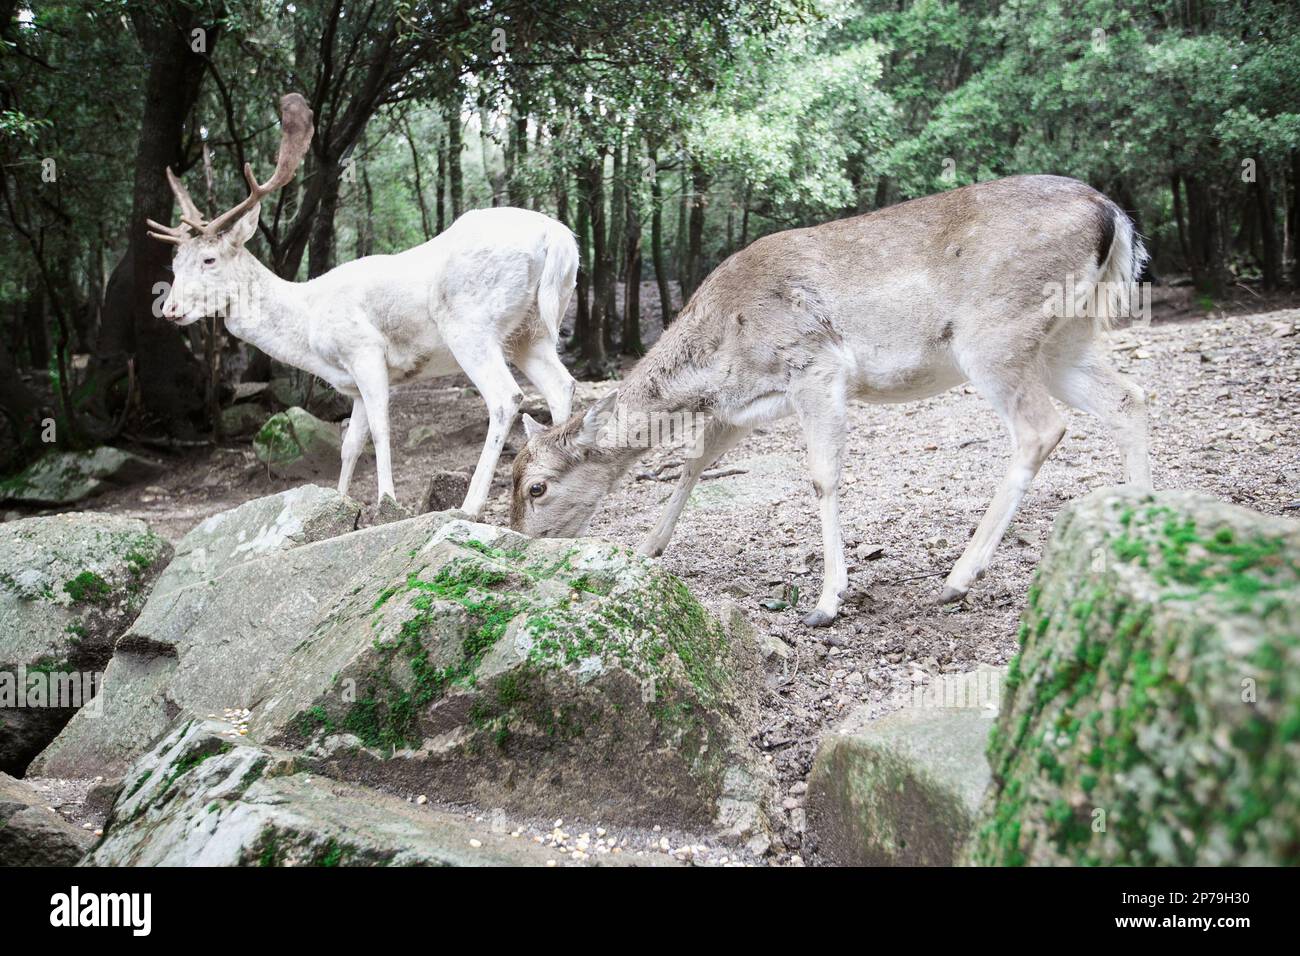 Scene of two fallow deer, a white buck and a light brown doe, seen from the side in a wood. Stock Photo